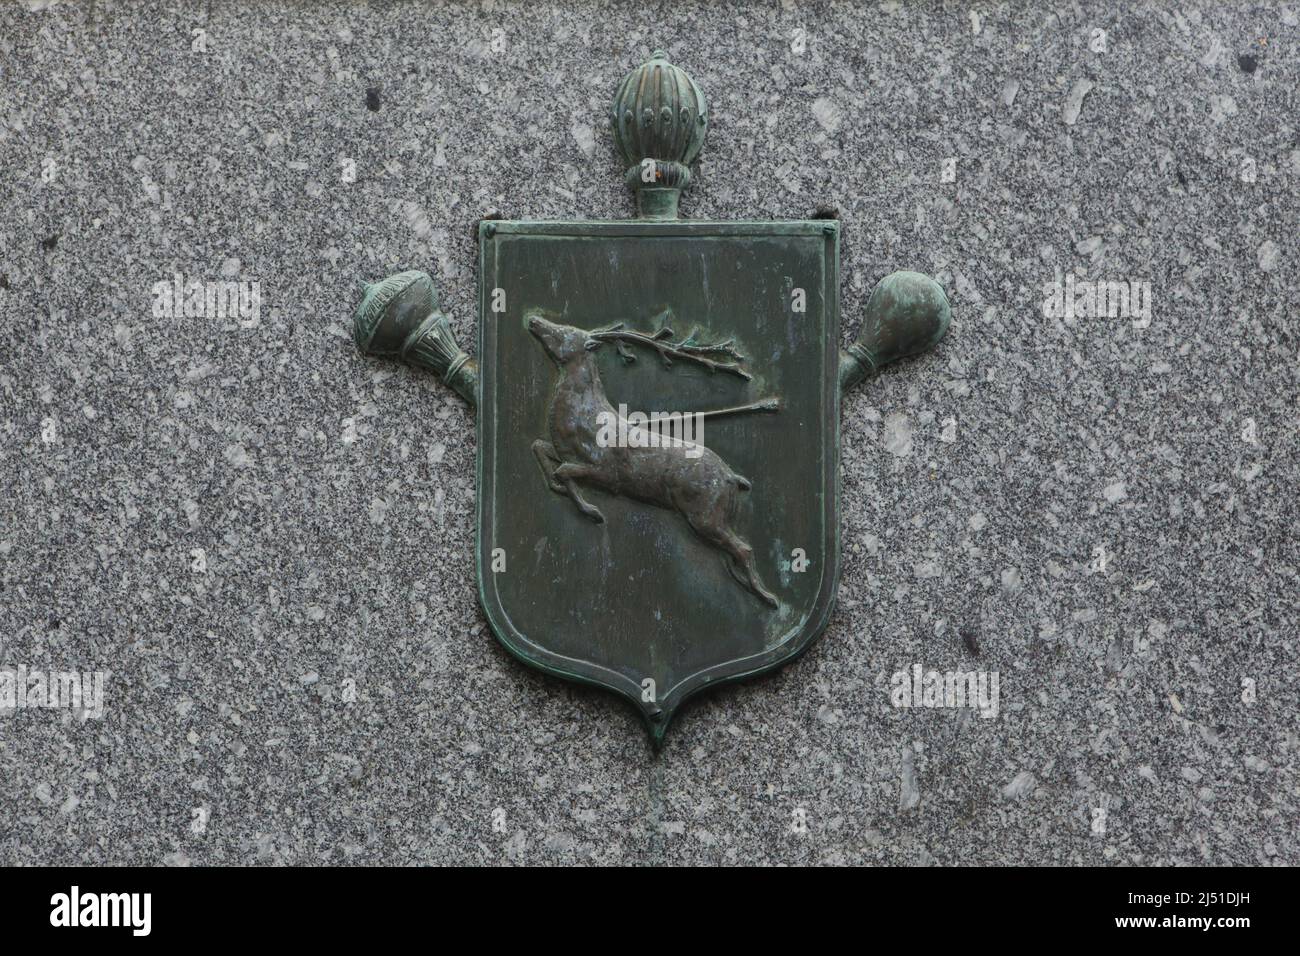 Coat of arms of the Don Cossacks depicted on the grave of Russian General Afrikan Bogaewsky (1873-1934) at the Russian Cemetery in Sainte-Geneviève-des-Bois (Cimetière russe de Sainte-Geneviève-des-Bois) near Paris, France. General Bogaewsky was a Lieutenant General of the Imperial Russian Army and also the Ataman of the Don Republic. Stock Photo